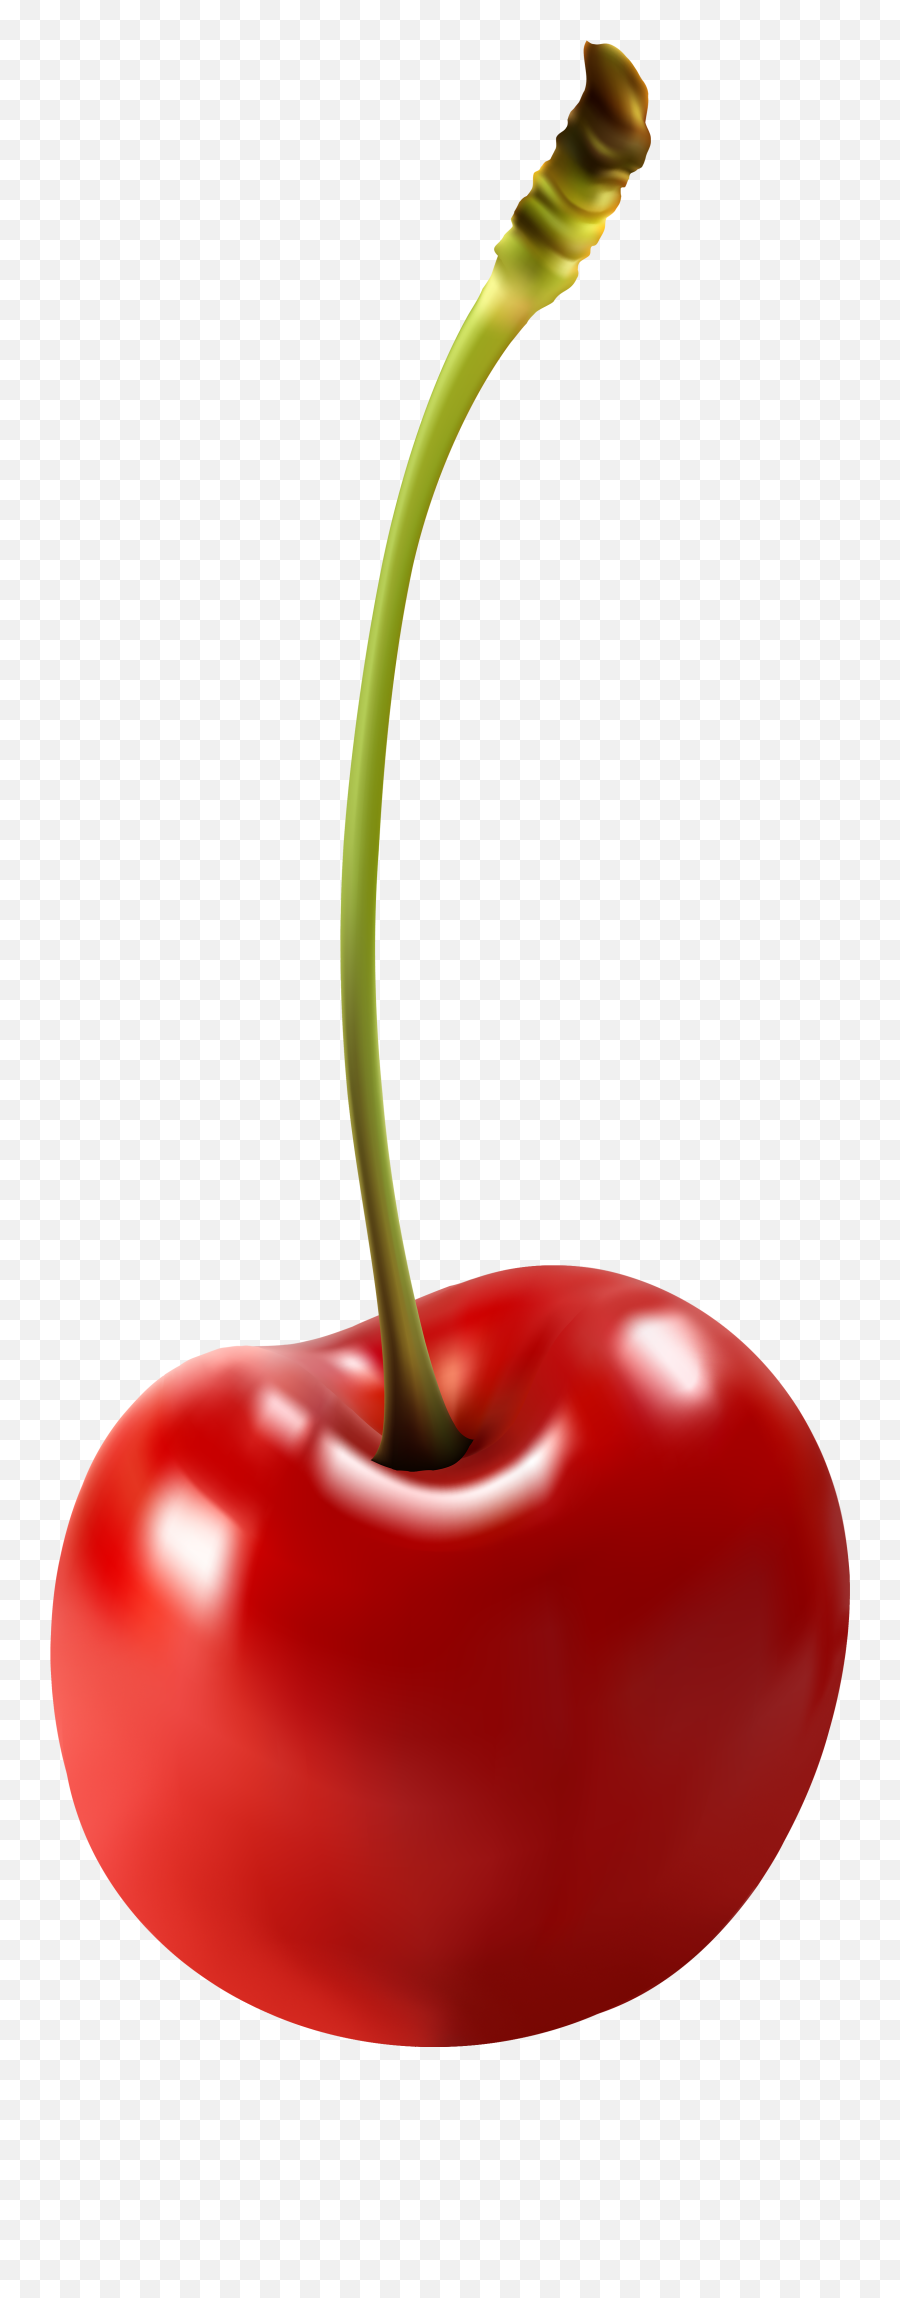 Cherry Clipart Transparent Pencil And In Color Png